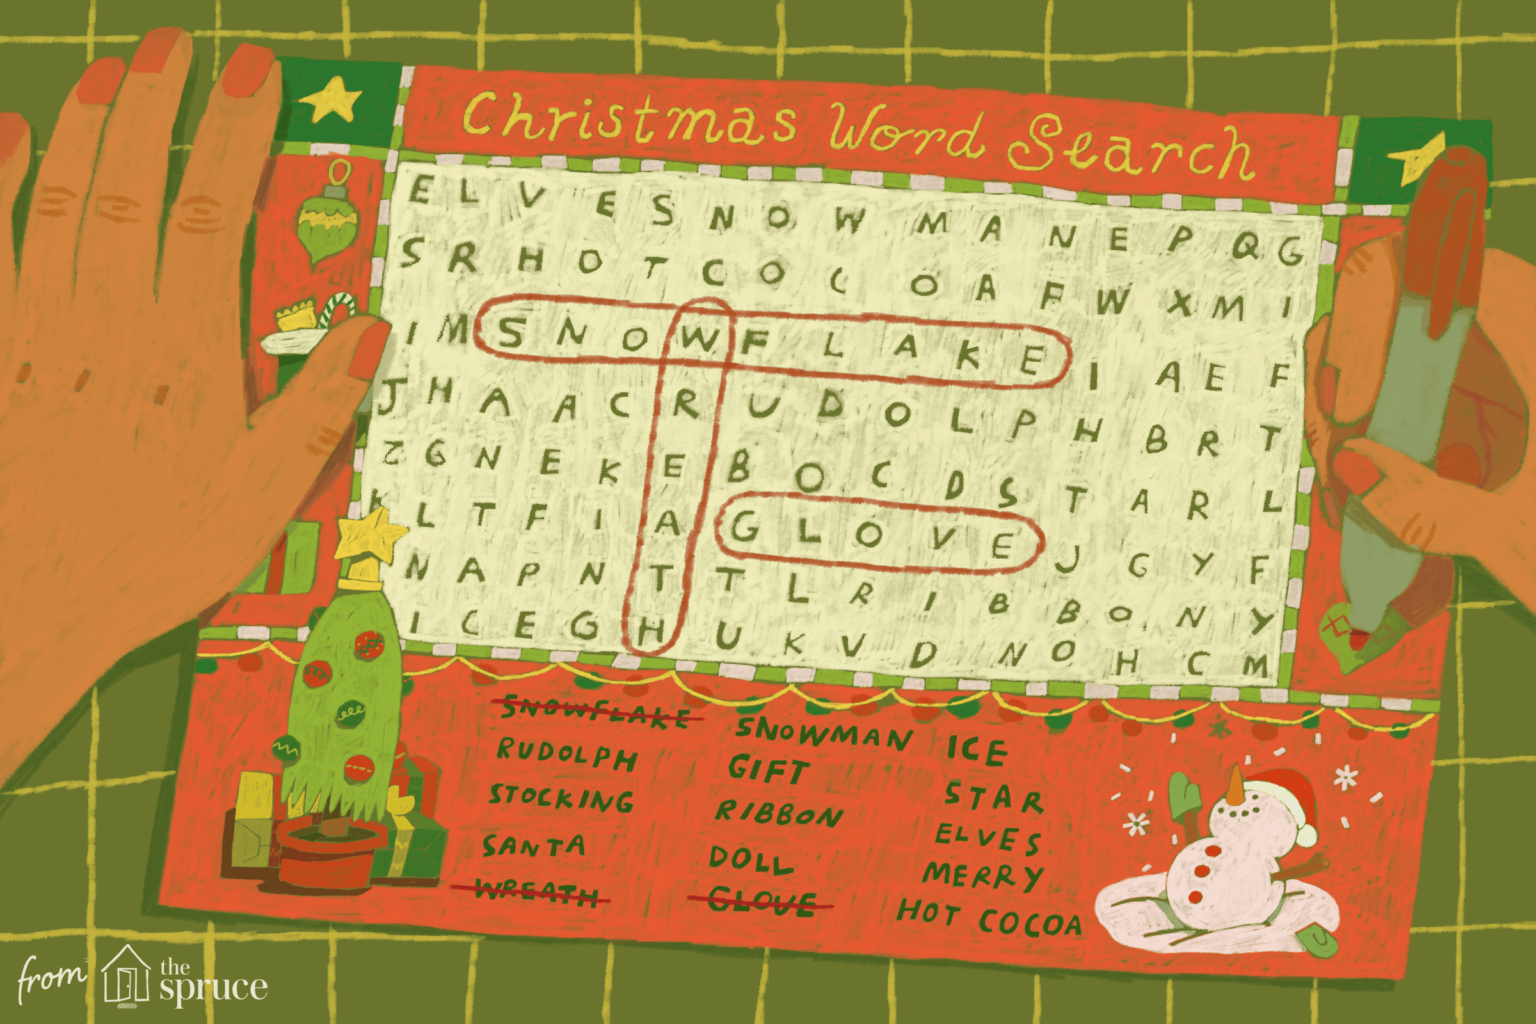 37-free-christmas-word-search-puzzles-for-kids-world-celebrat-daily-celebrations-ideas